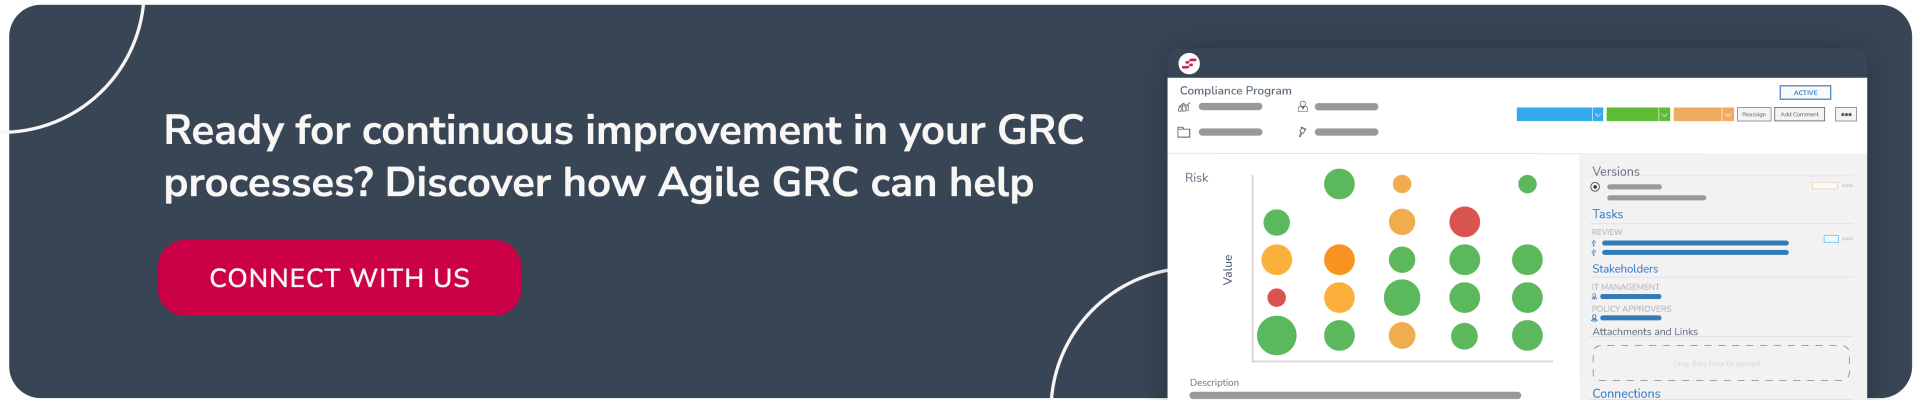 ready for continuous improvement in your GRC processes? Discover how agile GRC can help